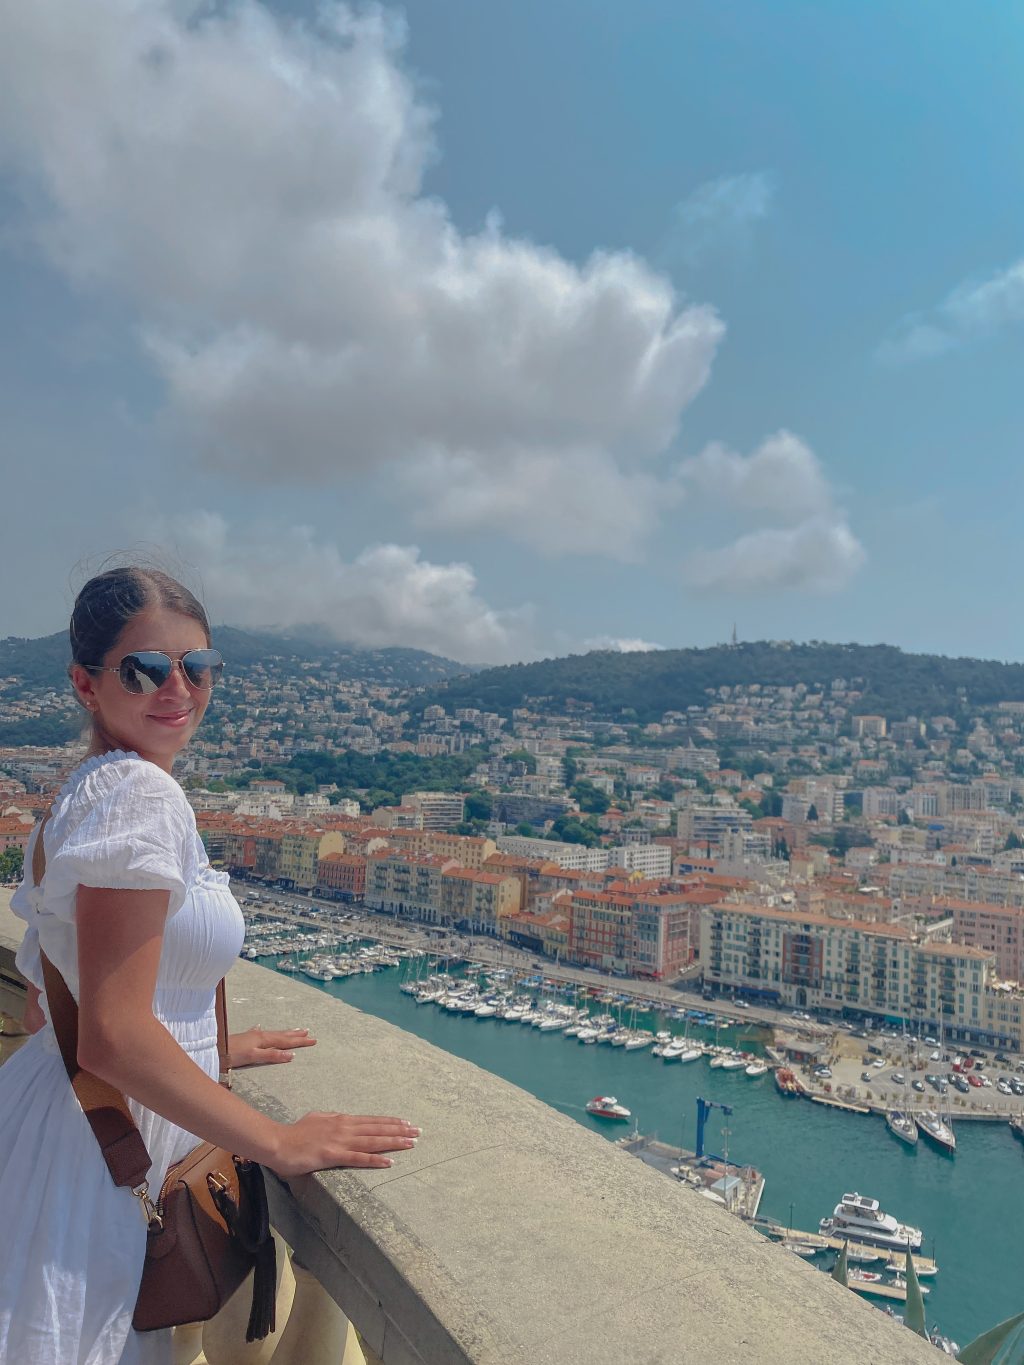 D'Andrea looks out to Port Lympia from Colline du Château in Nice, France on June 17. The Château offered expansive views of the turquoise water of the French Riviera.